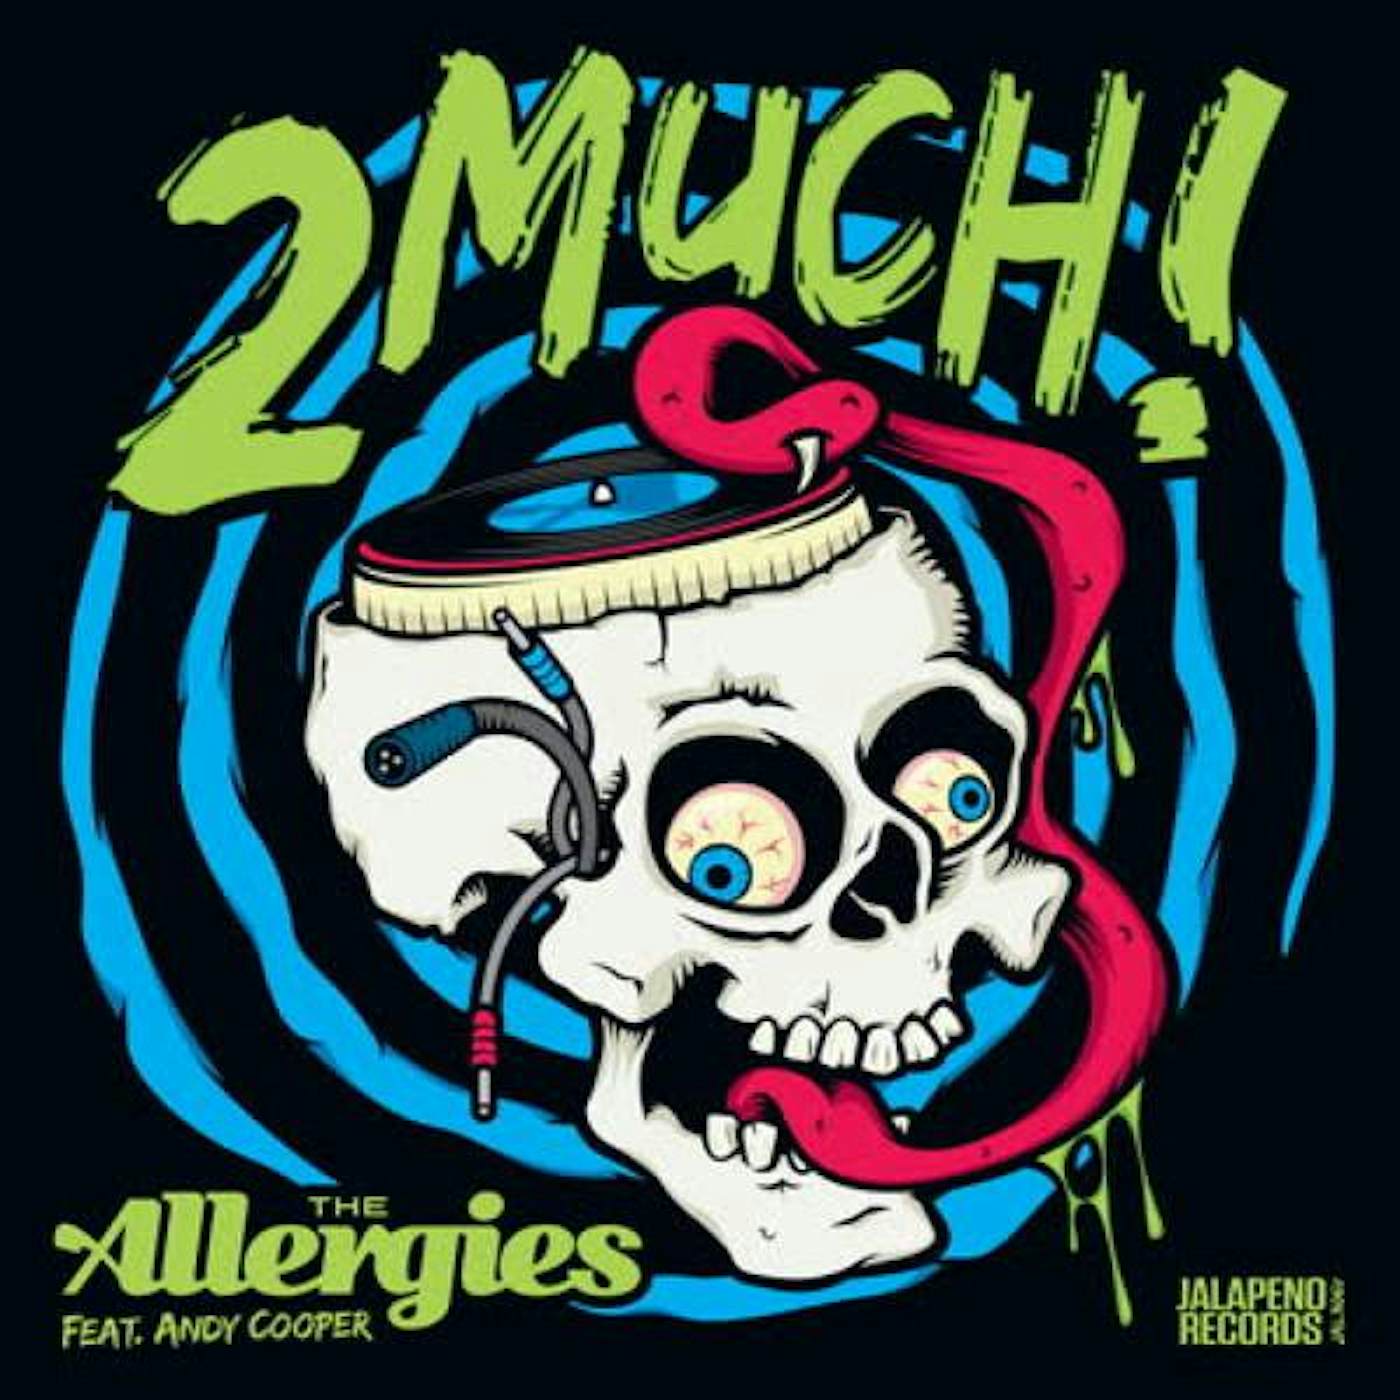 The Allergies 2 Much! Vinyl Record